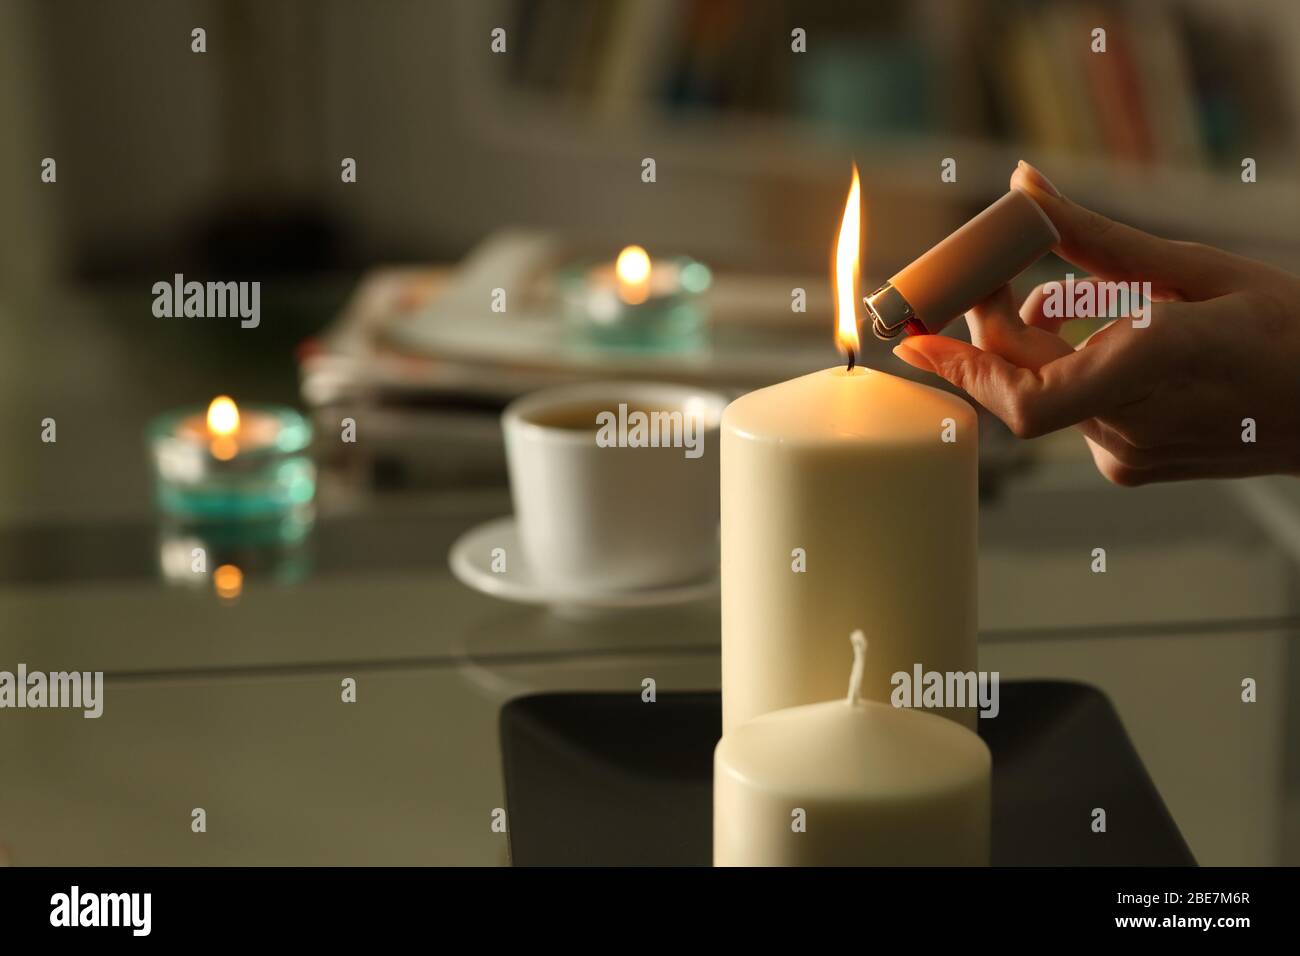 https://c8.alamy.com/comp/2BE7M6R/close-up-of-woman-hand-lighting-candles-with-lighter-in-the-night-at-home-on-a-power-outage-2BE7M6R.jpg